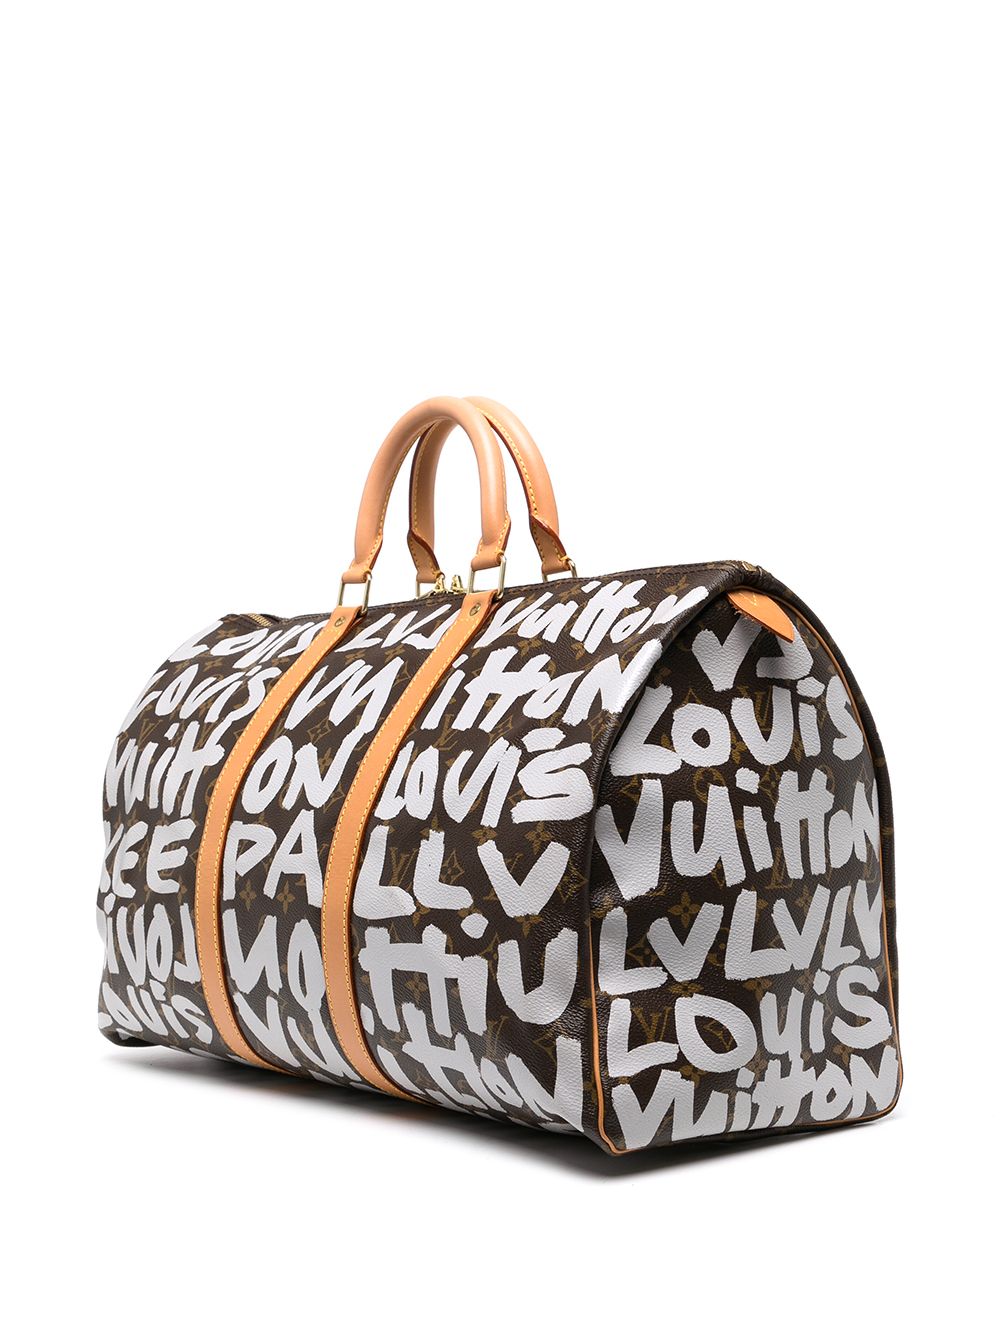 Louis Vuitton x Stephen Sprouse 2001 pre-owned Alma - Depop